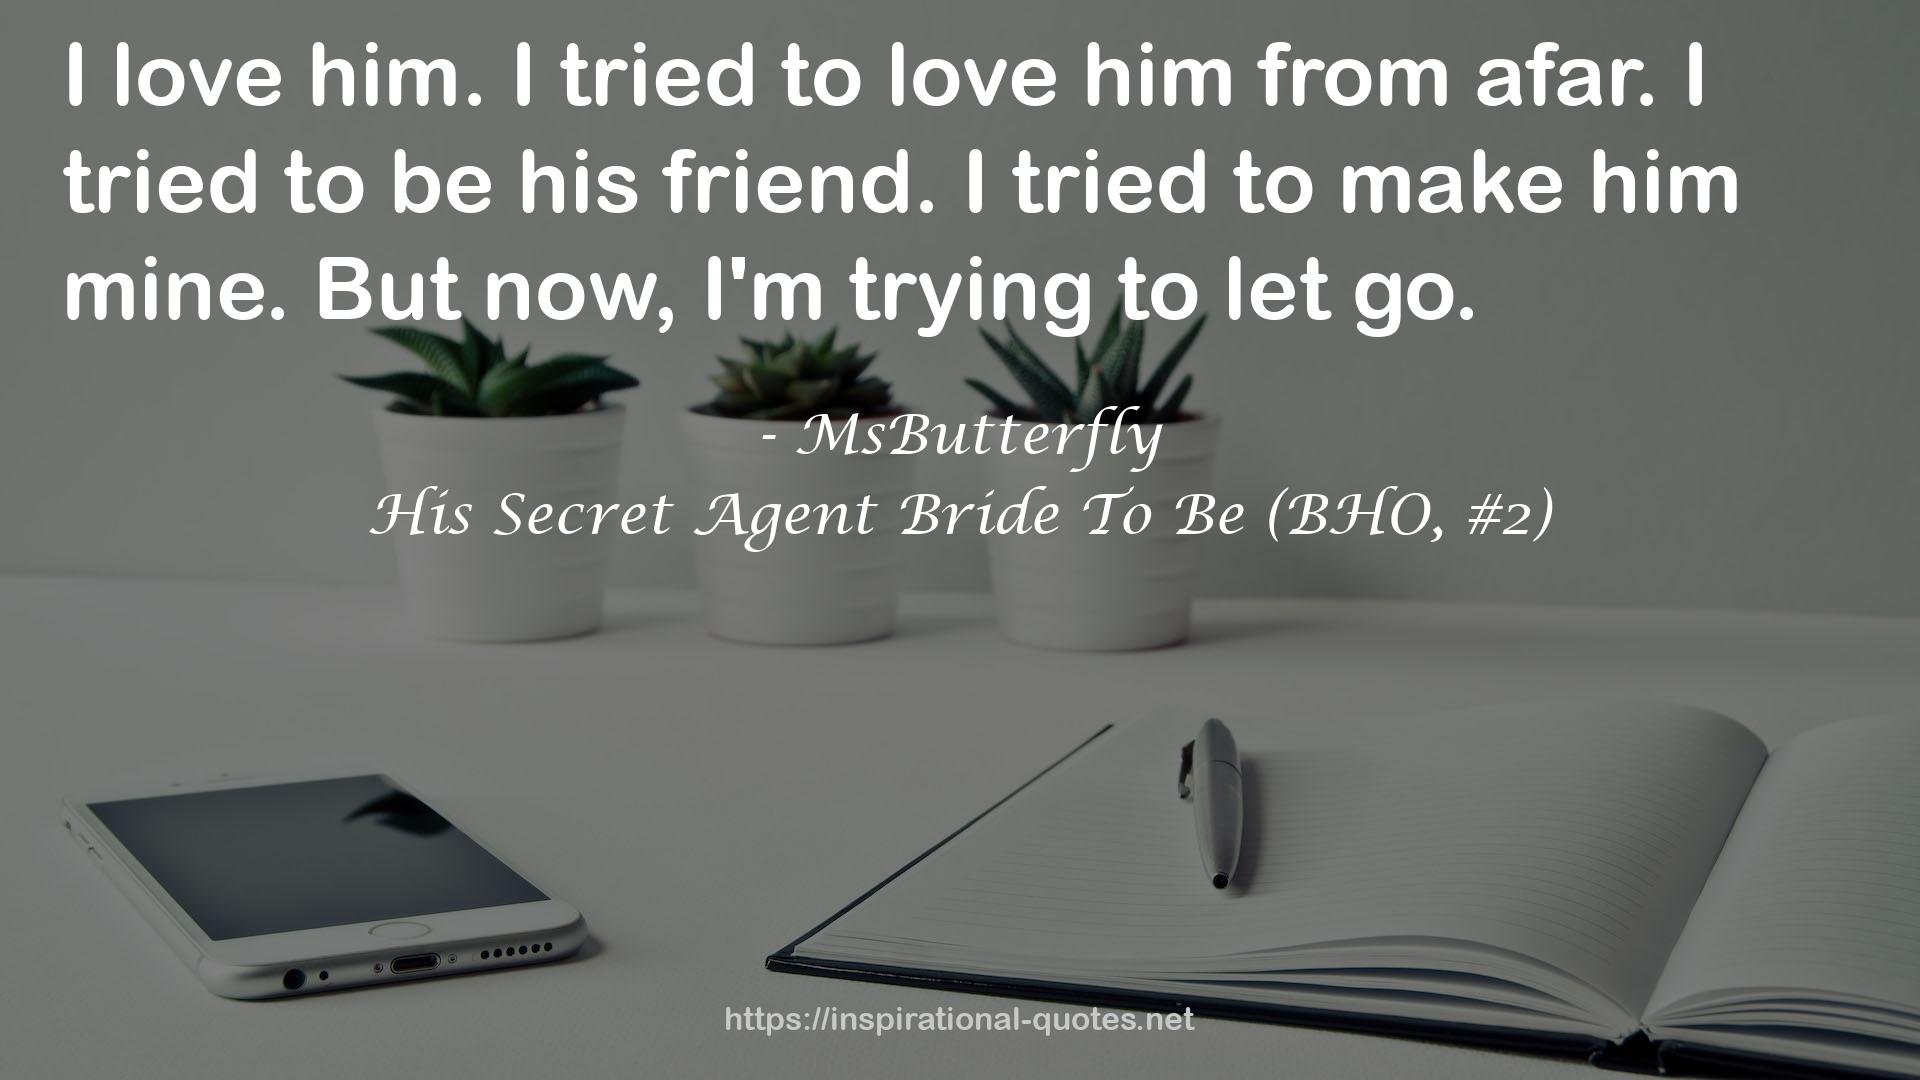 His Secret Agent Bride To Be (BHO, #2) QUOTES